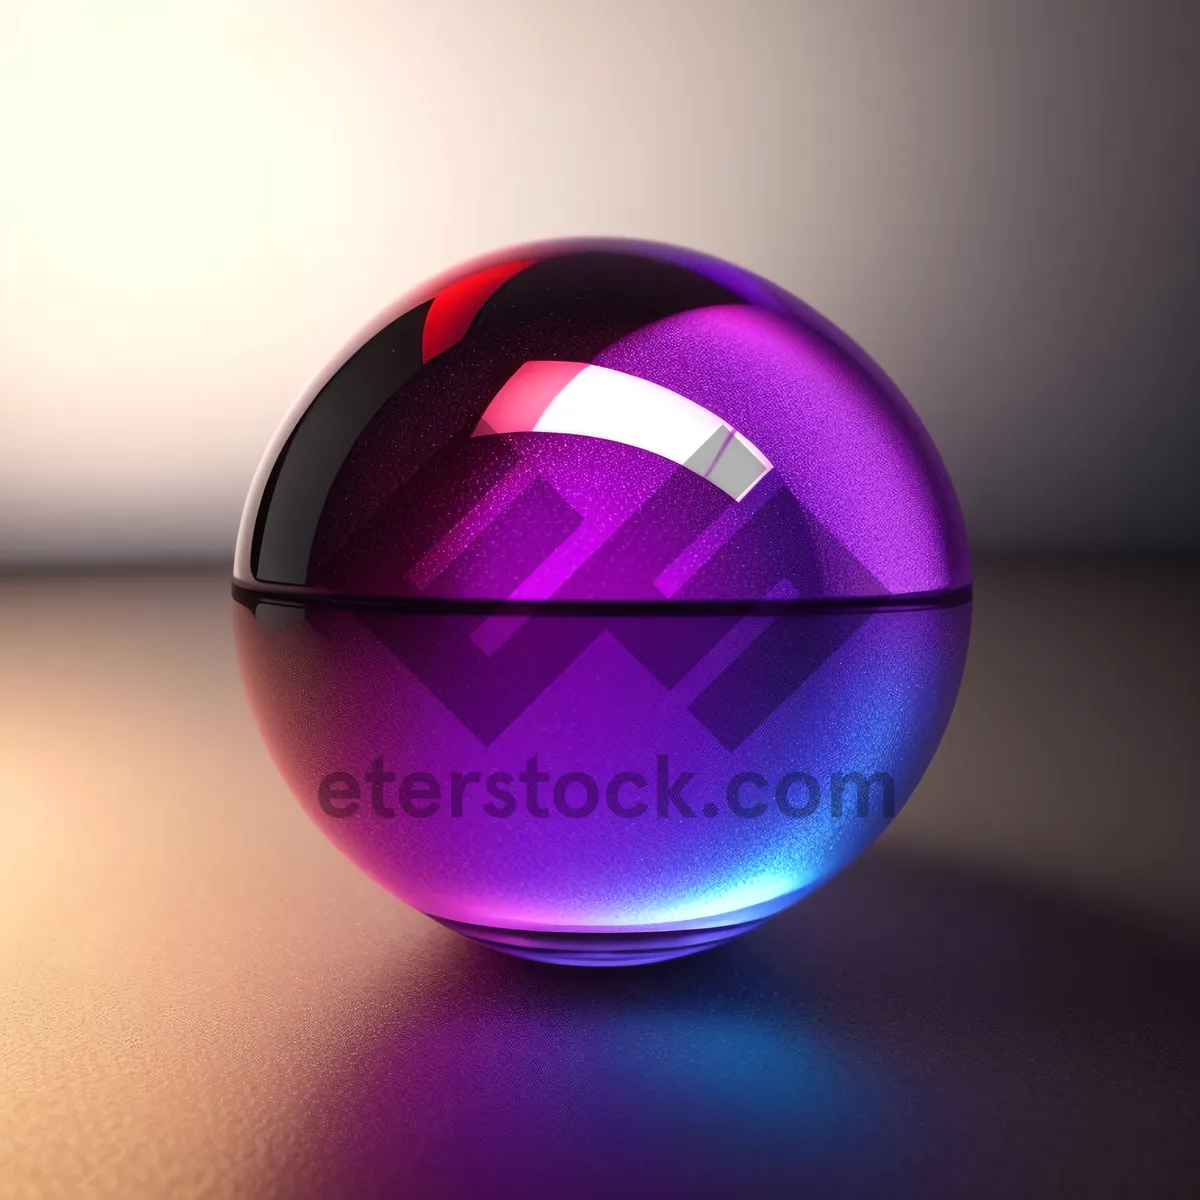 Picture of Shiny Web Button Set with Glass Reflection